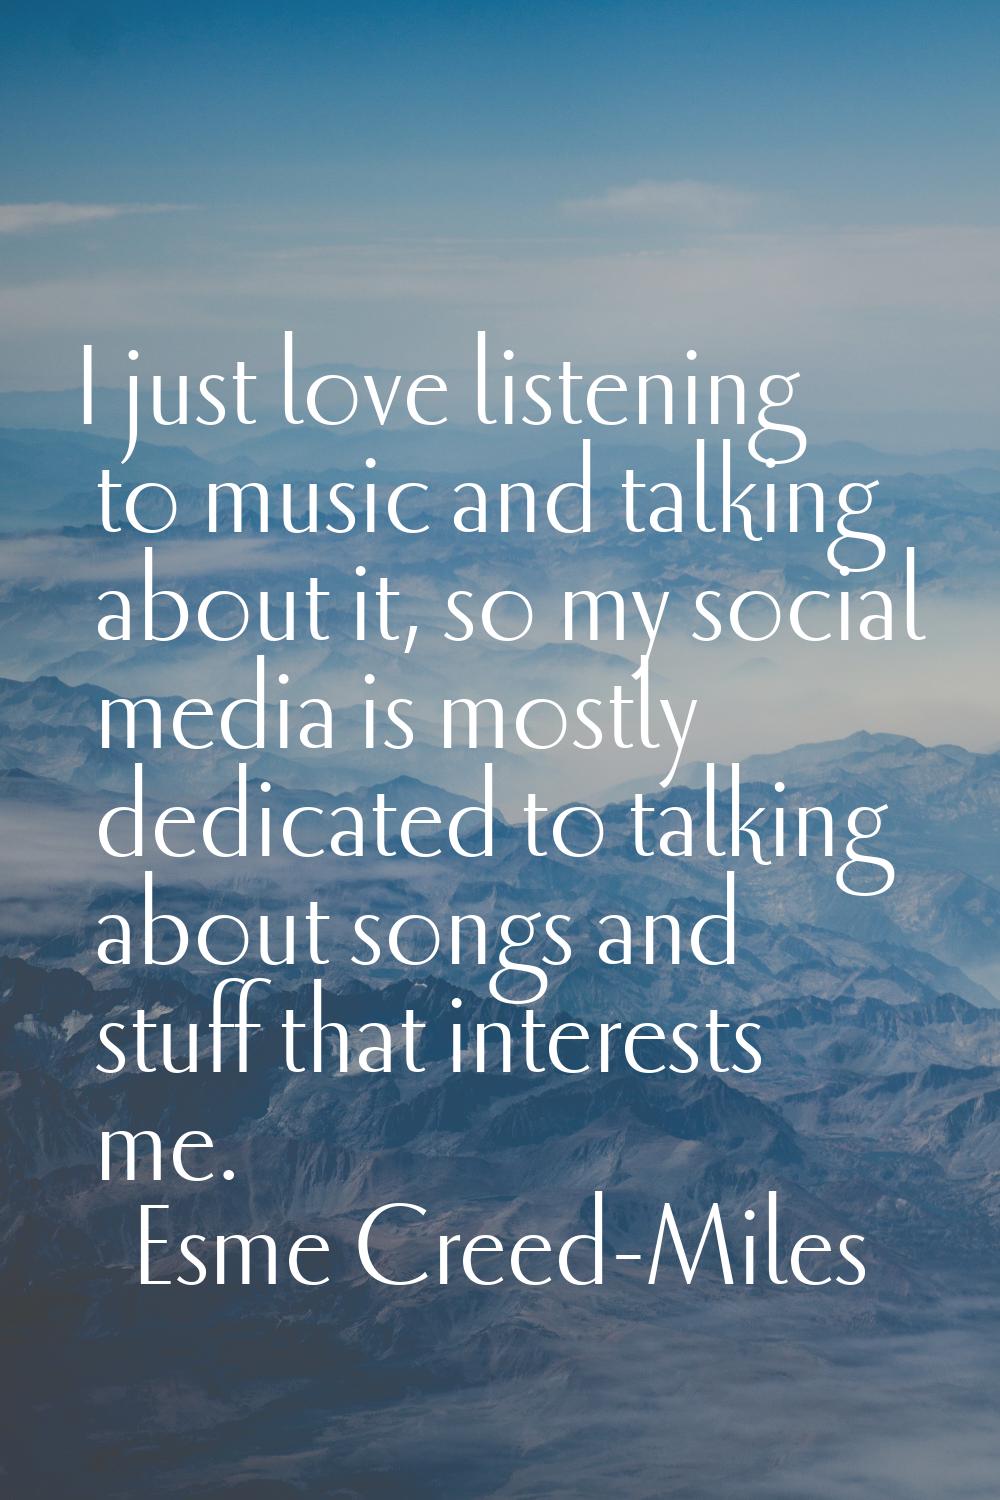 I just love listening to music and talking about it, so my social media is mostly dedicated to talk